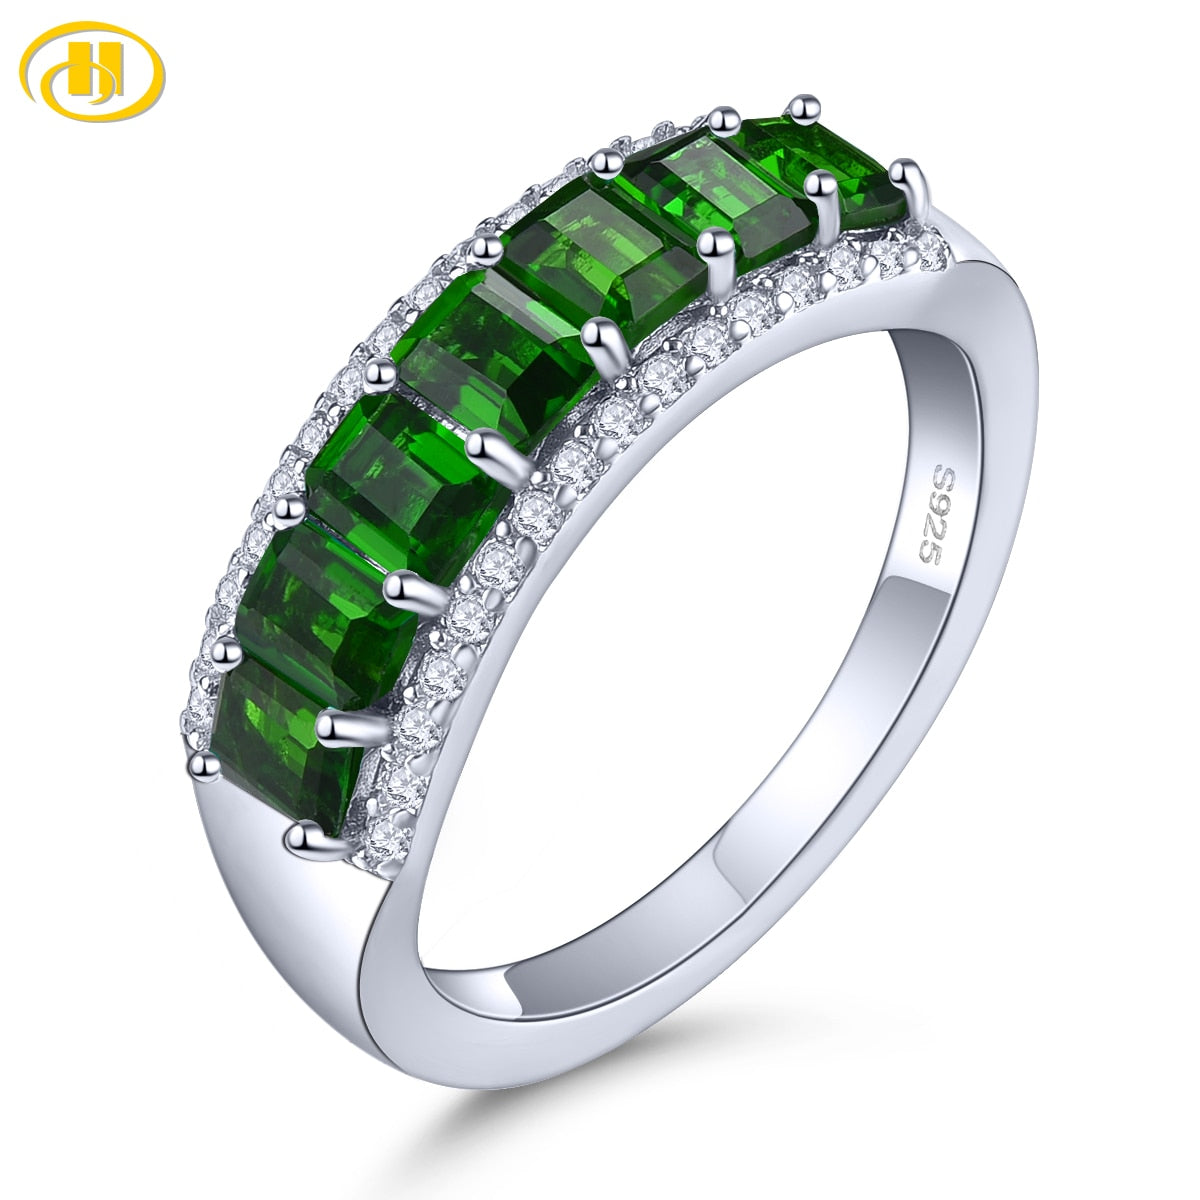 Natural Chrome Diopside Sterling Silver Rings 1.6 Carats Vivid Green Gemstone Women Elegant Style New Year Gifts Top Quality